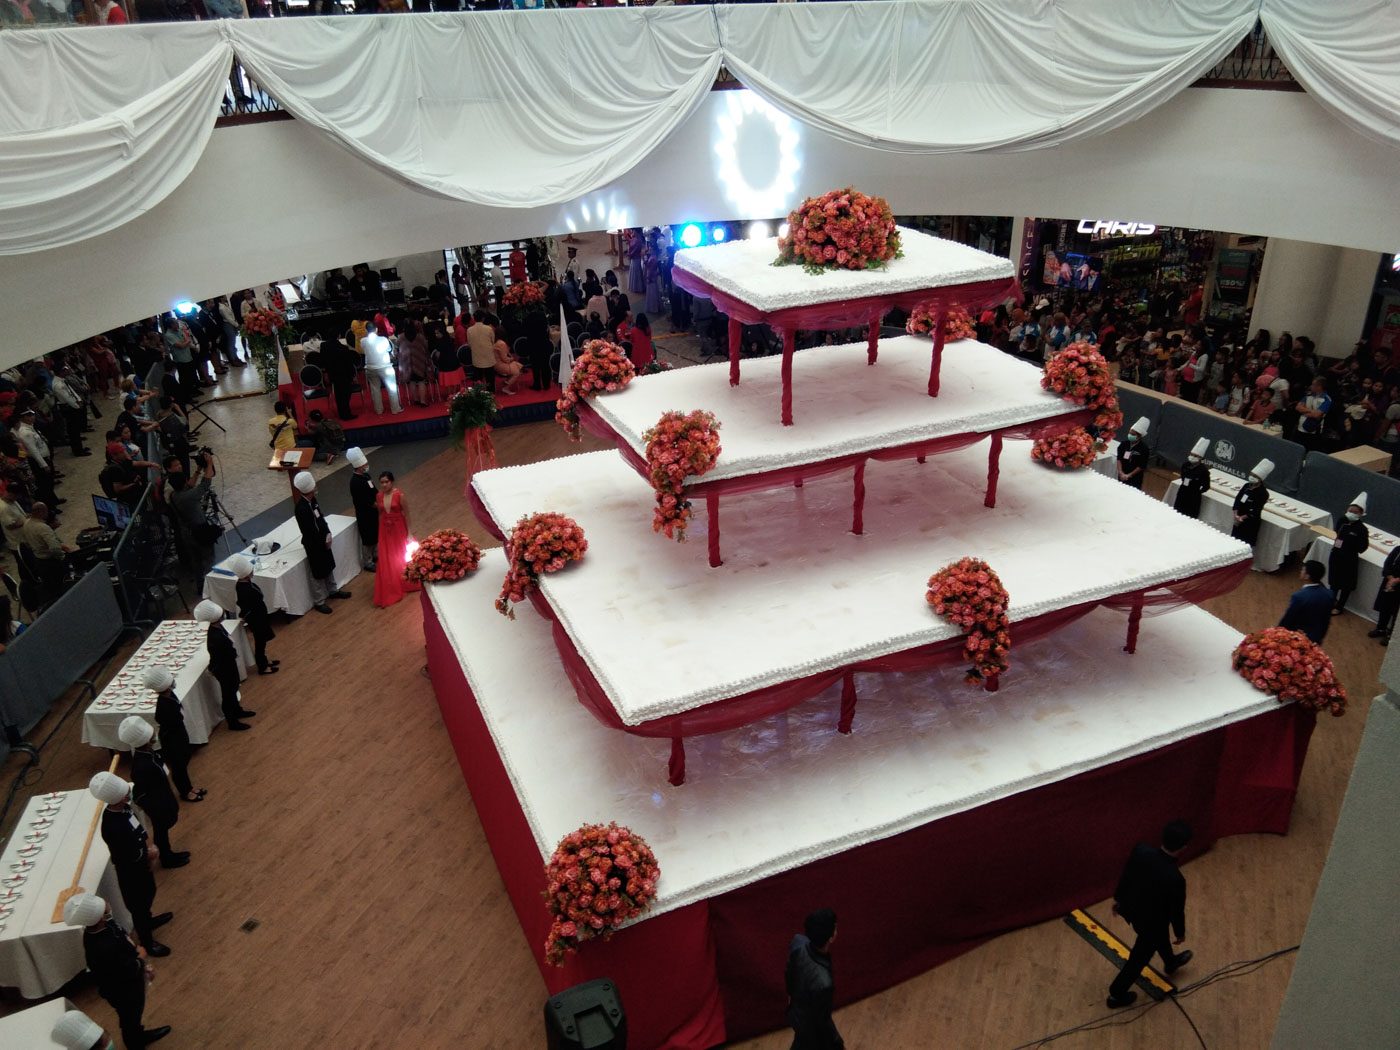 24-FOOT CAKE. The cake weighs 13 to 14 tons, say organizers.  